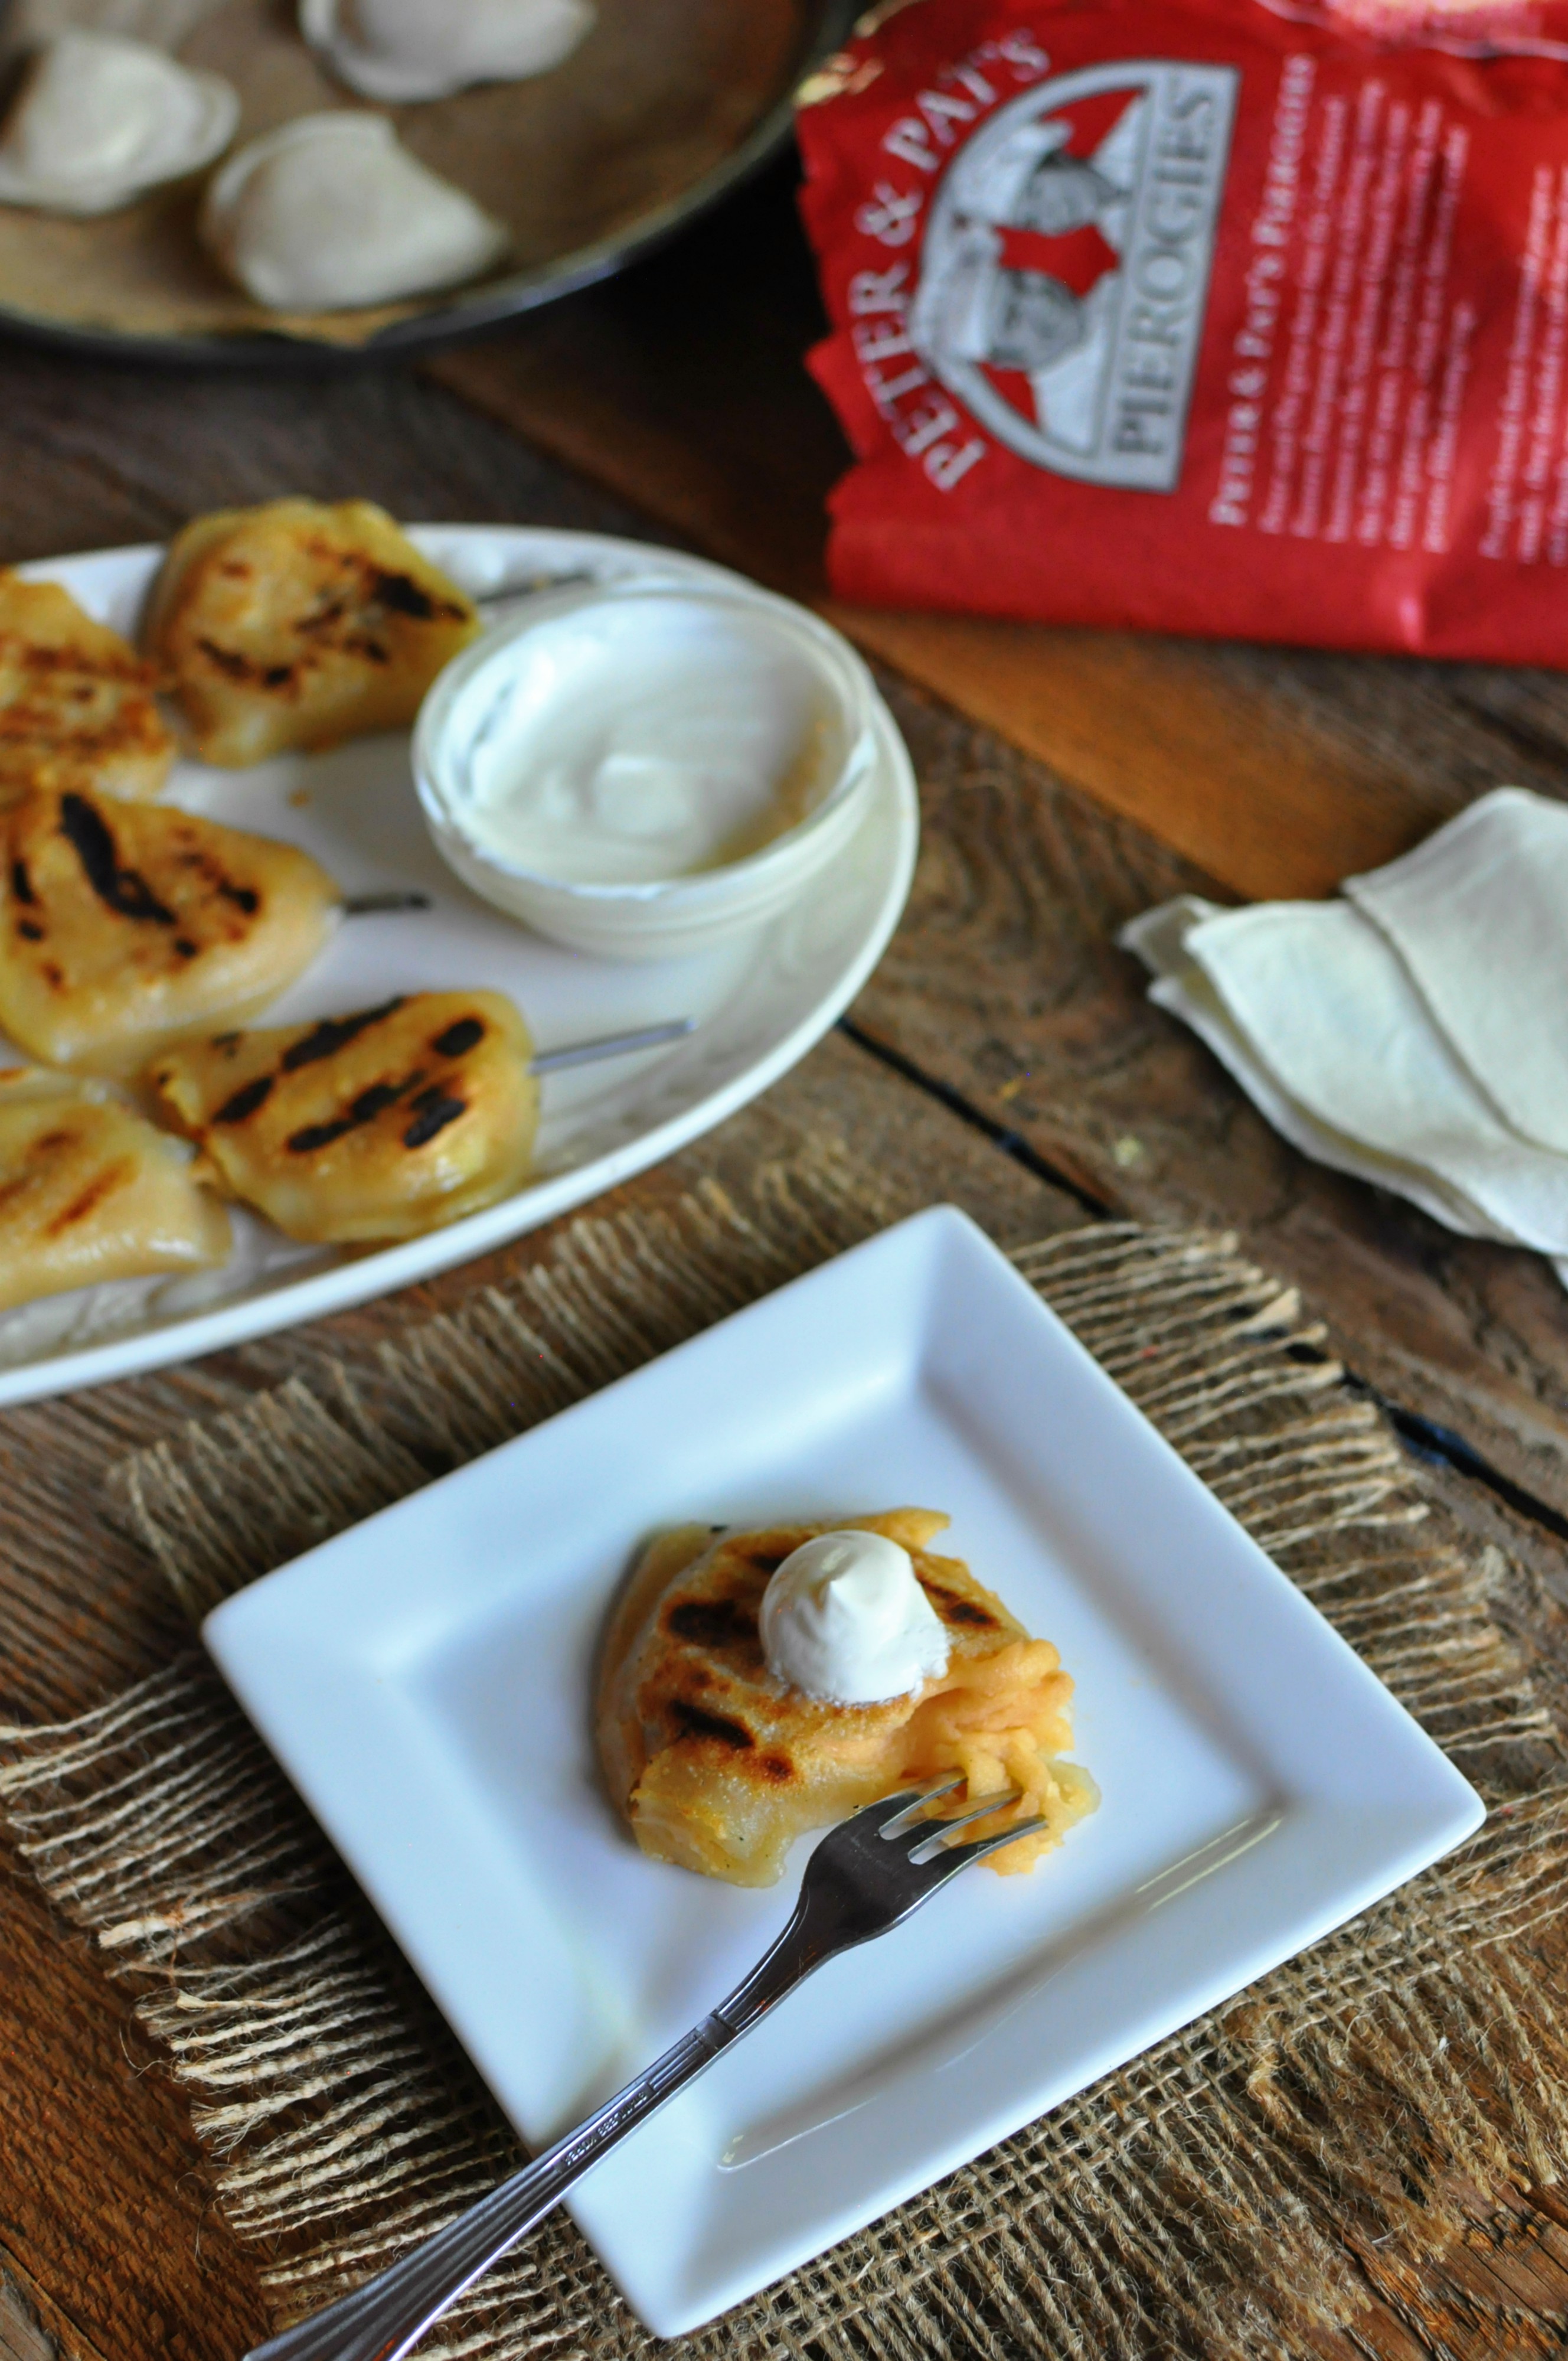 How to prepare a pre-made pierogi on the grill, served with sour cream and applesauce